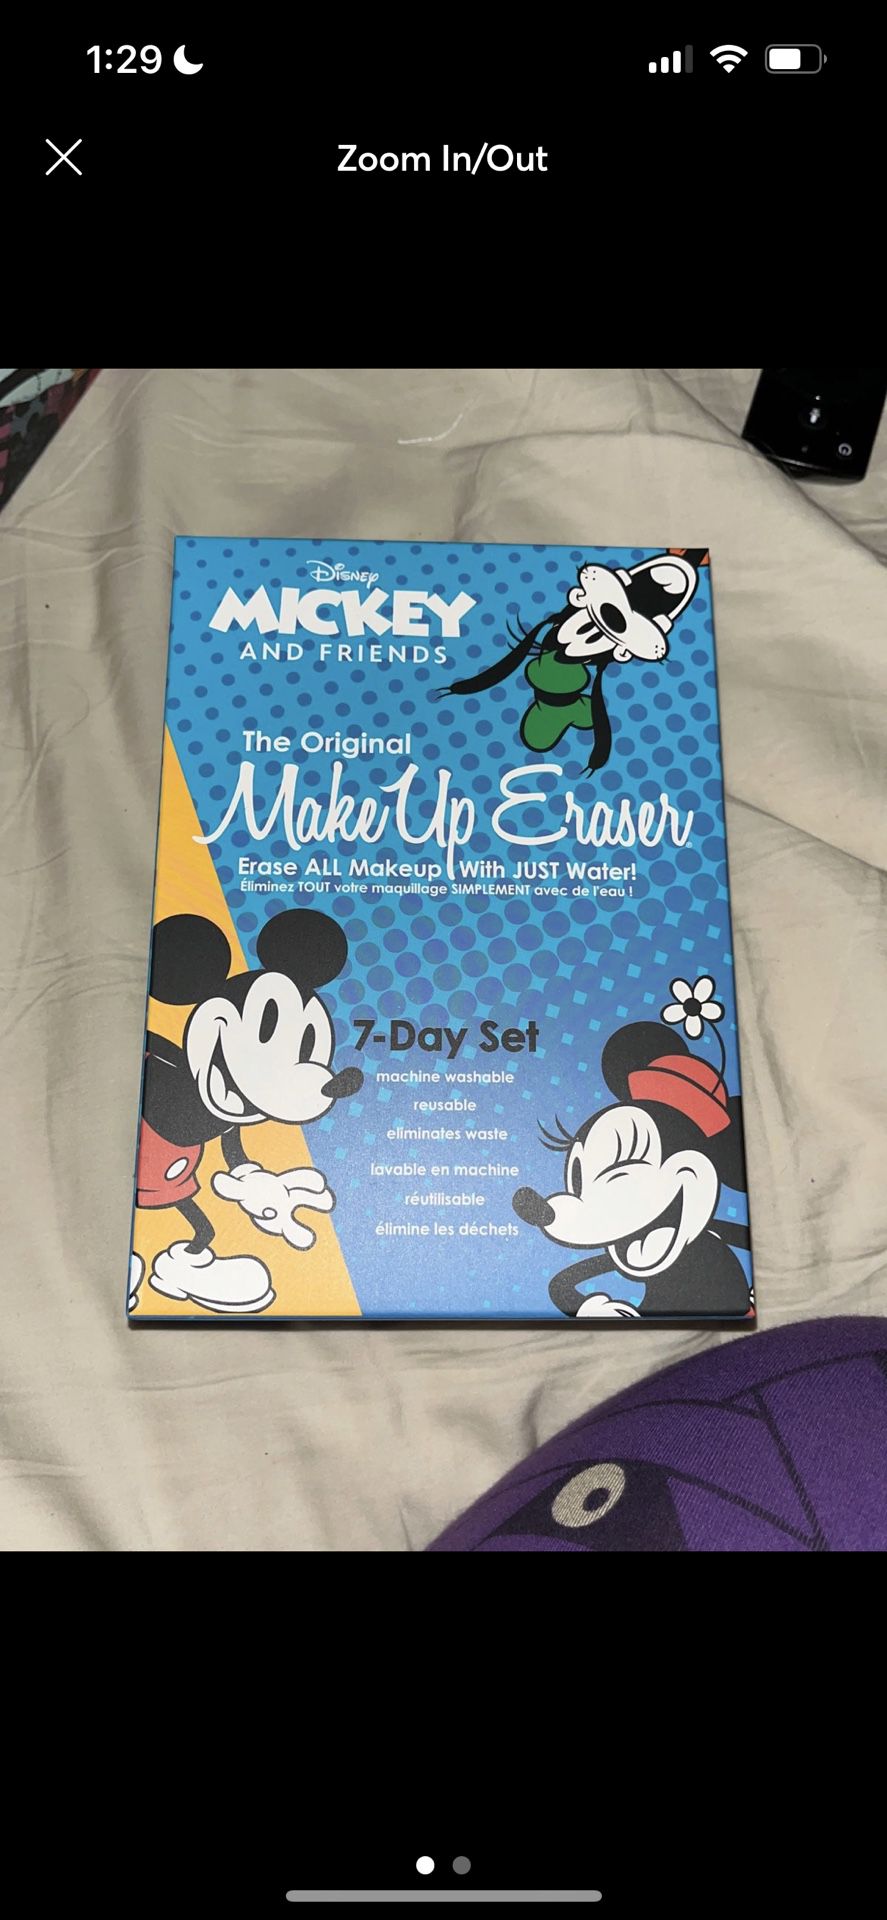 Disney Makeup Eraser Mickey Mouse And friends